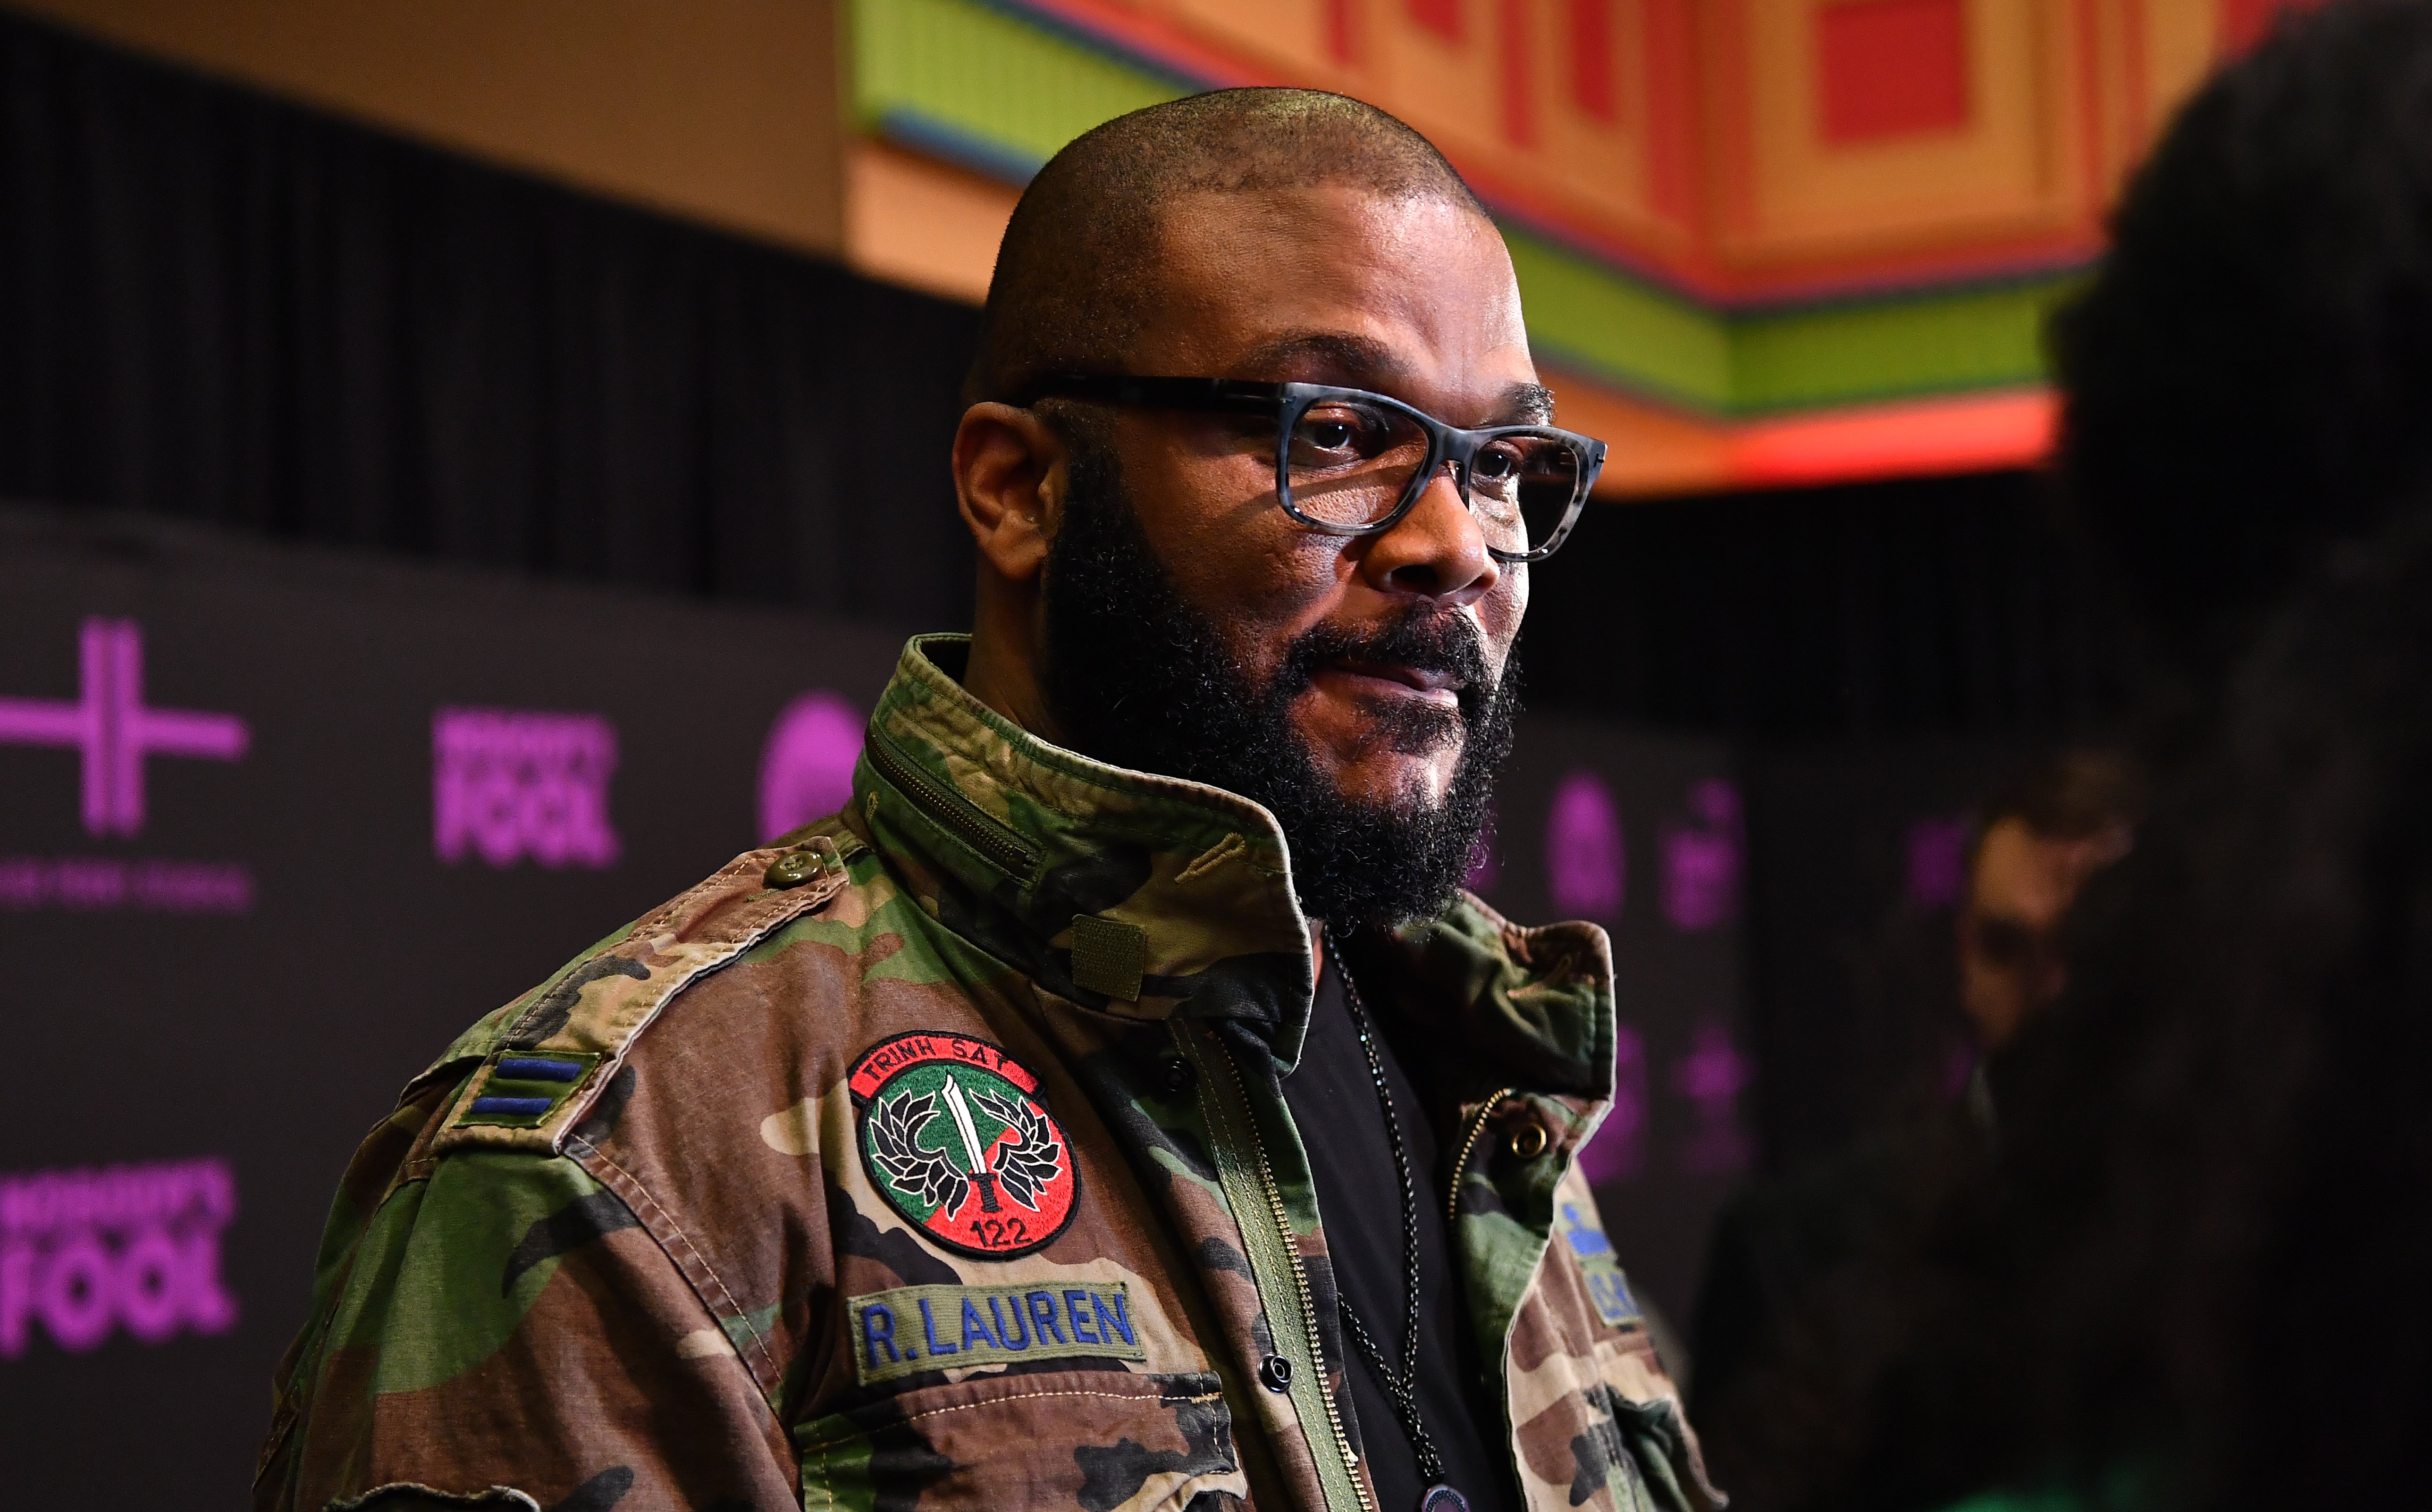 Tyler Perry attends "Nobody's Fool" Atlanta screening on Nov. 1, 2018 | Photo: Getty Images